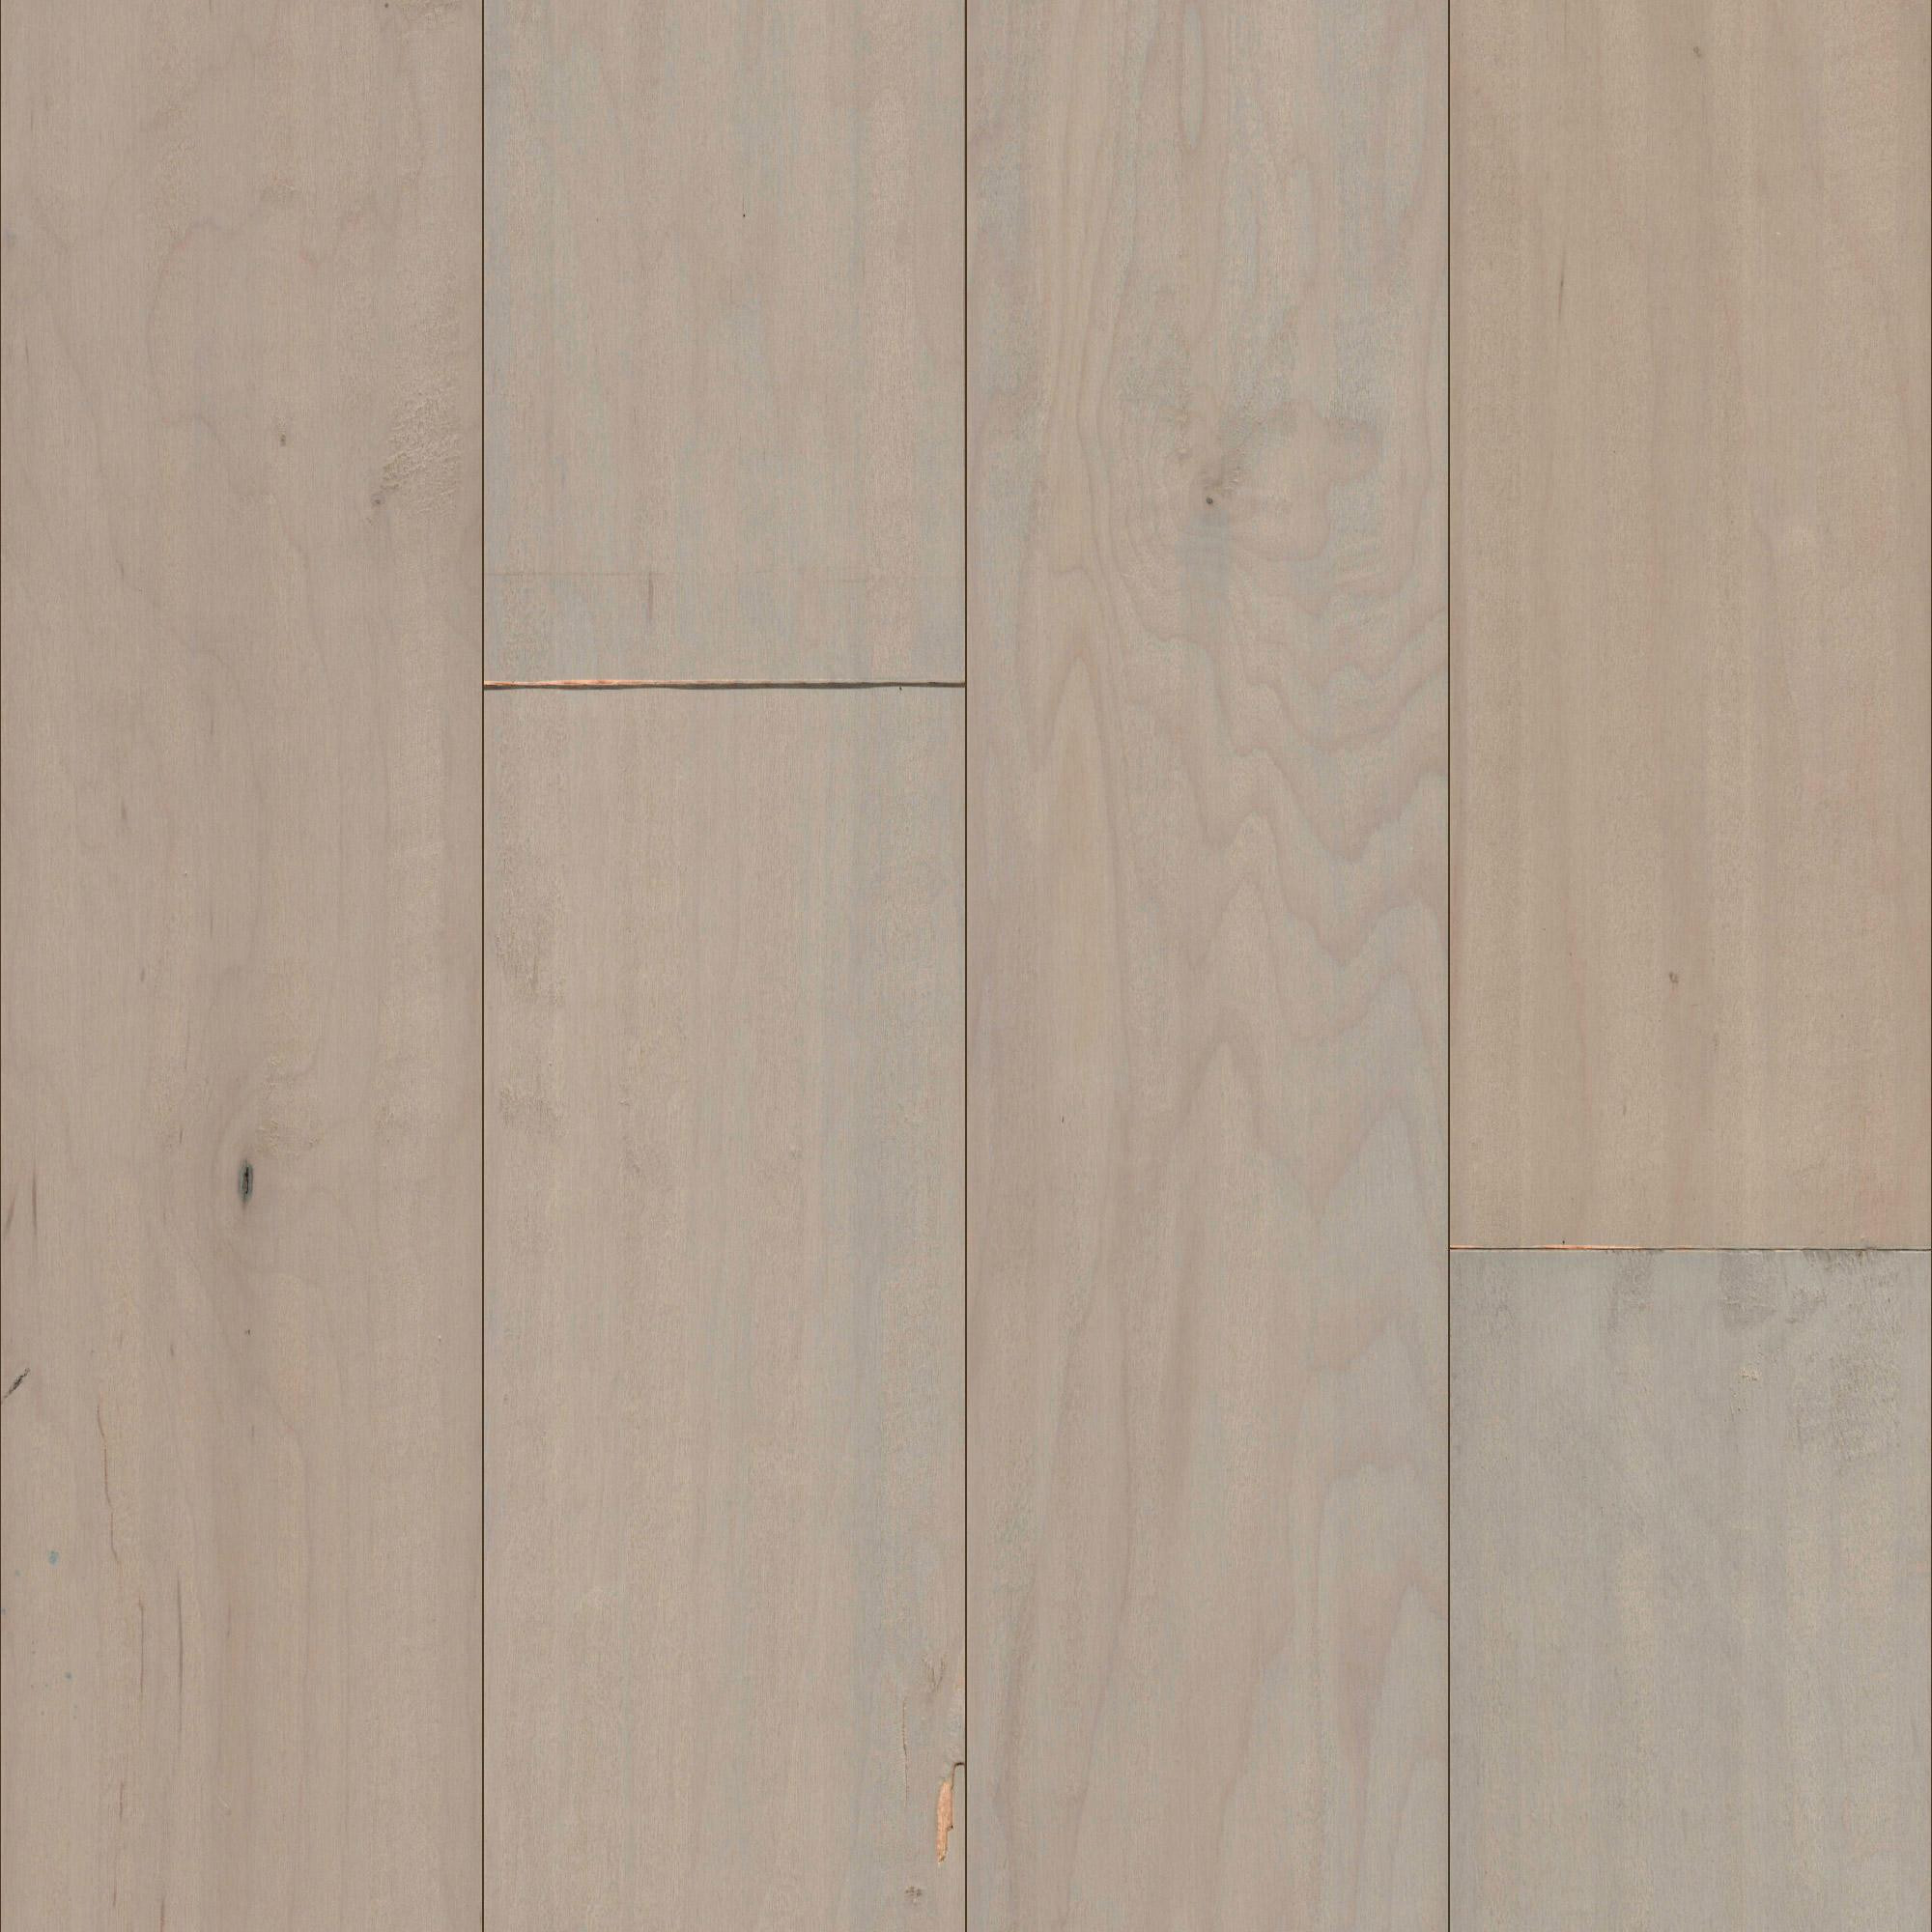 diy engineered hardwood floor of mullican lincolnshire sculpted maple frost 5 engineered hardwood within mullican lincolnshire sculpted maple frost 5 engineered hardwood flooring